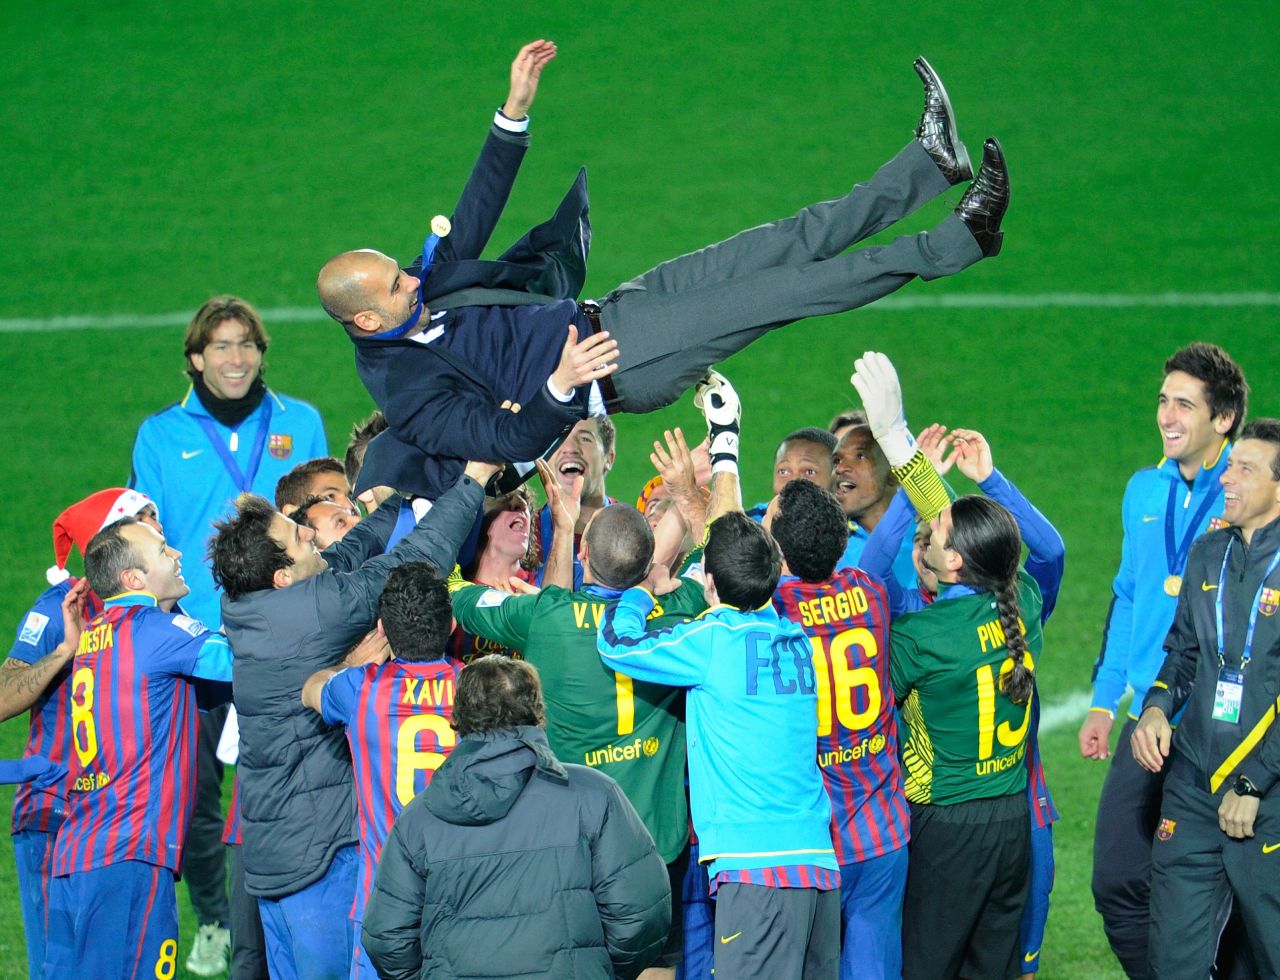 He was massively popular at the Camp Nou after four trophy-laden seasons. Here he is thrown in the air by his players after winning the FIFA Club World Cup for the second time in December 2011, having been the first team from Spain to win it two years earlier.